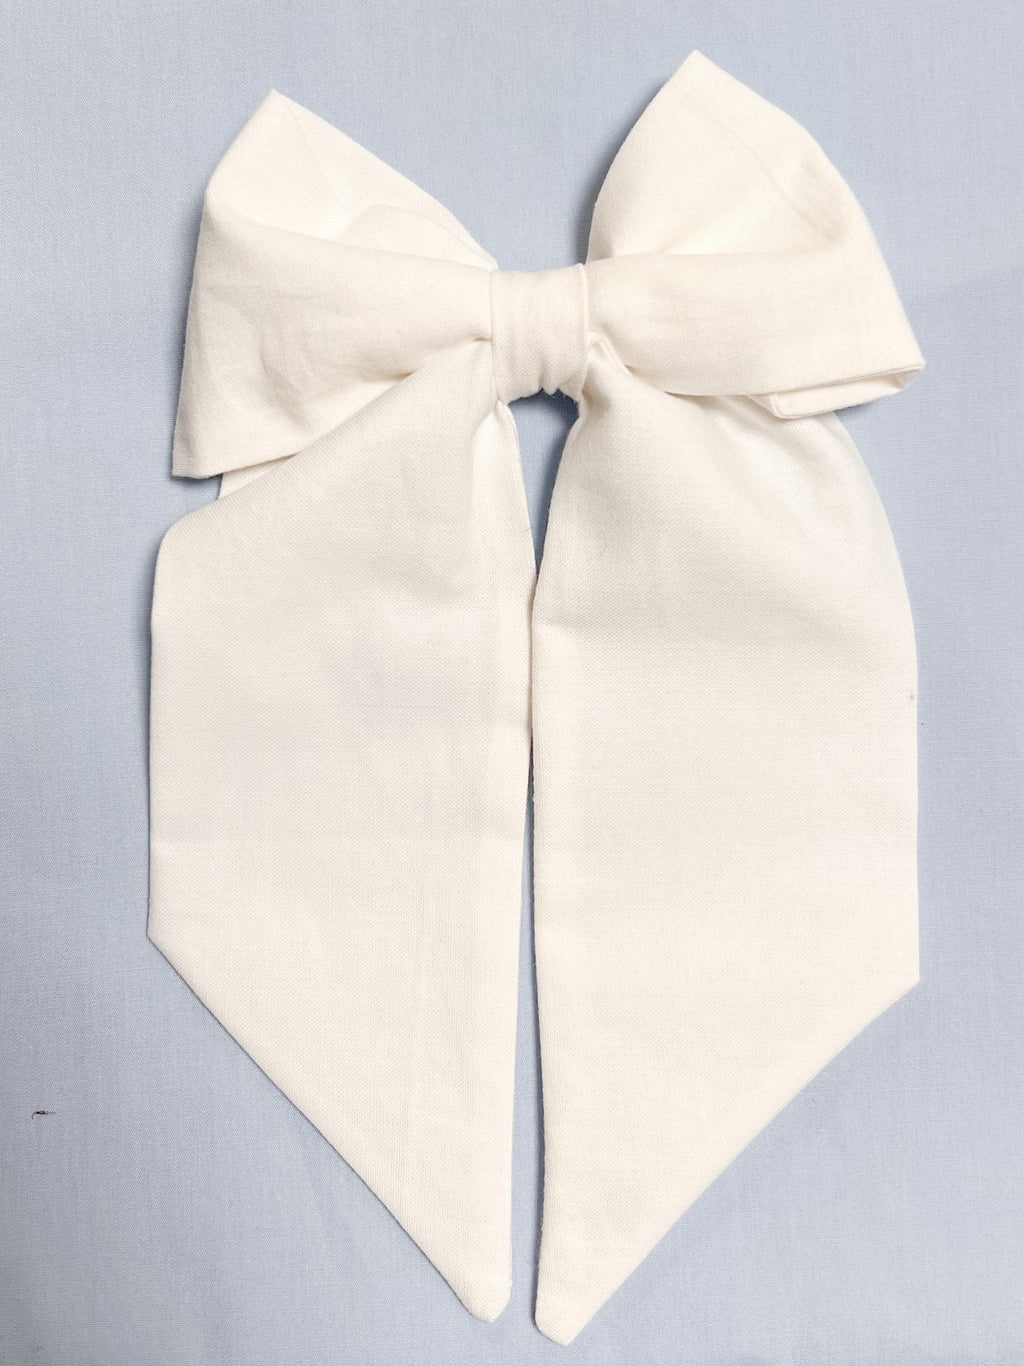 Vintage Sailor - Princeton | Nashville Bow Co. - Classic Hair Bows, Bow Ties, Basket Bows, Pacifier Clips, Wreath Sashes, Swaddle Bows. Classic Southern Charm.